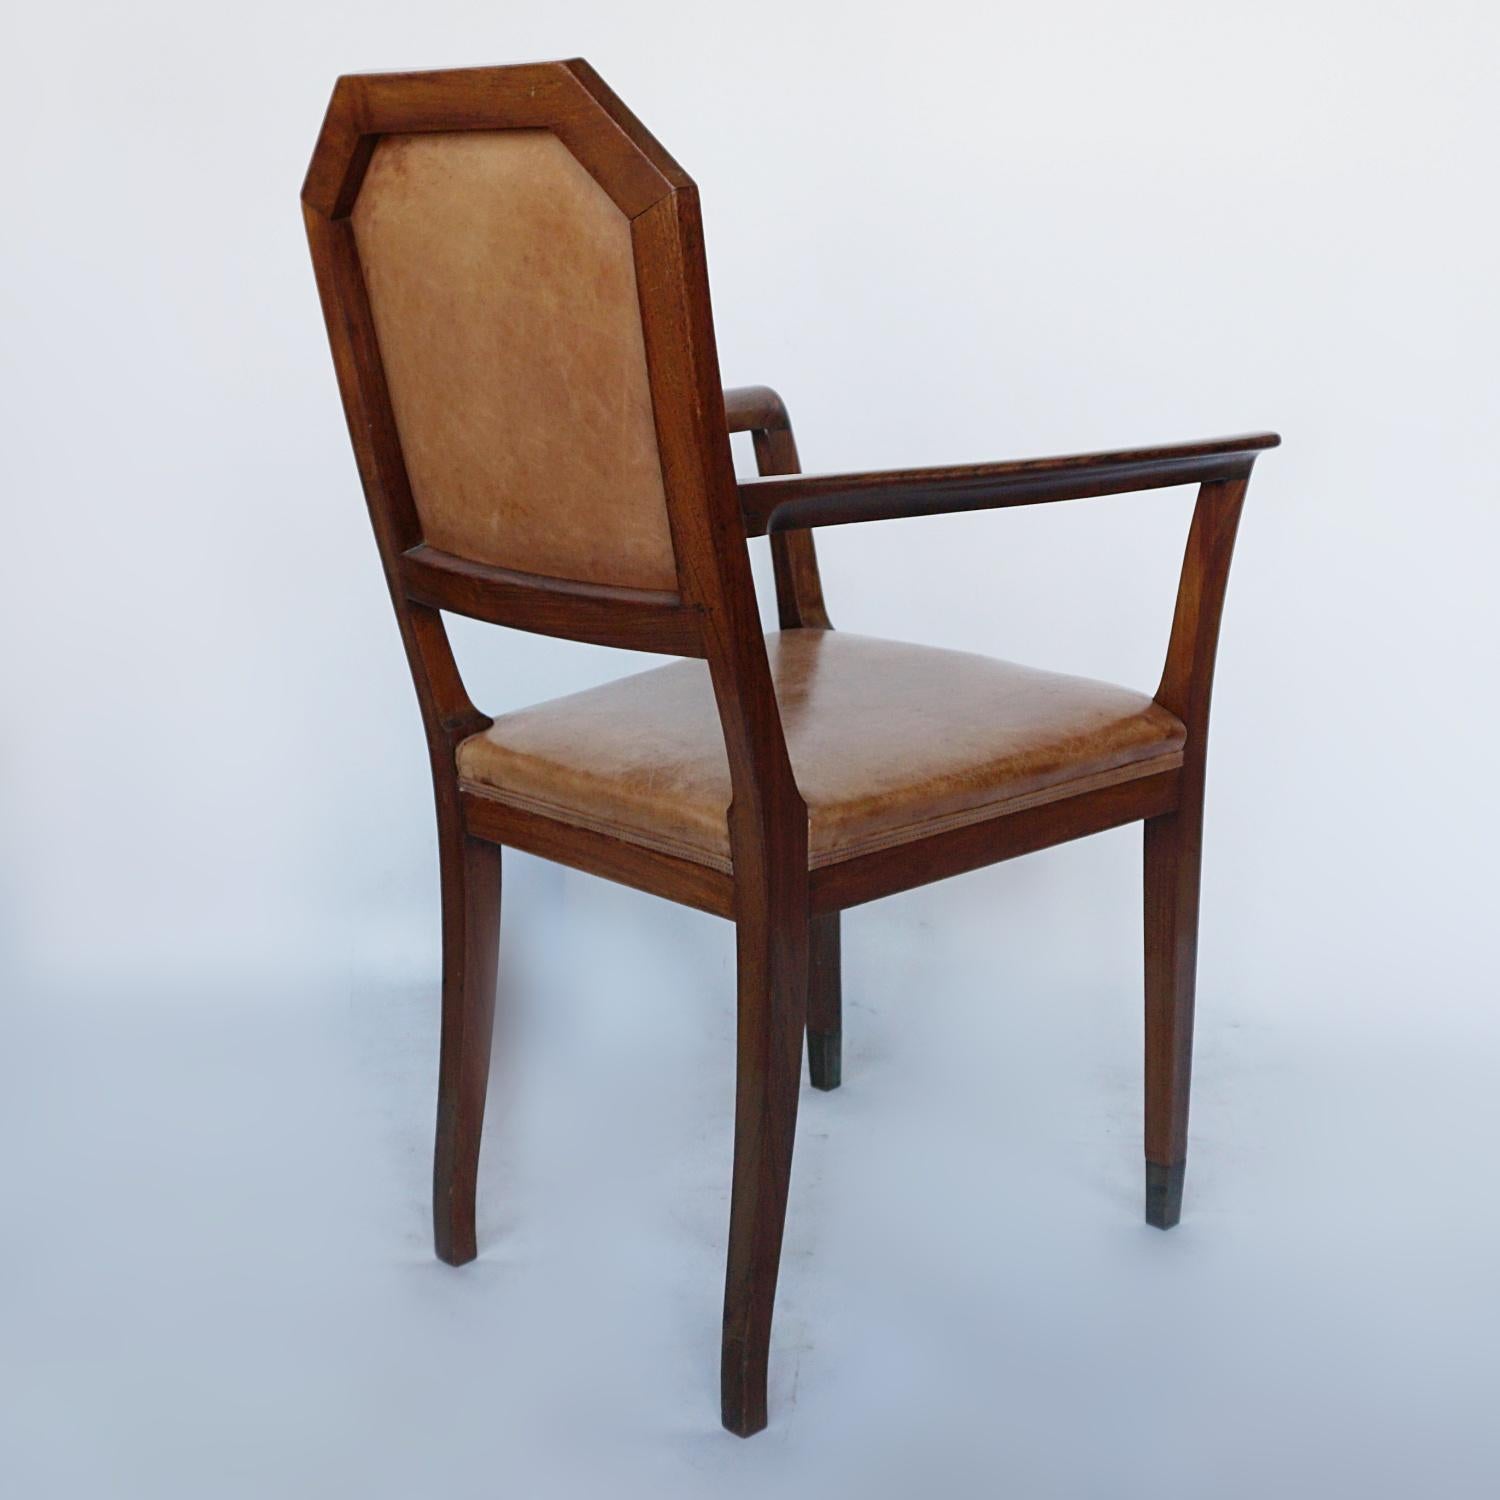 French Art Deco Desk Chair Walnut and Leather, Circa 1925 5